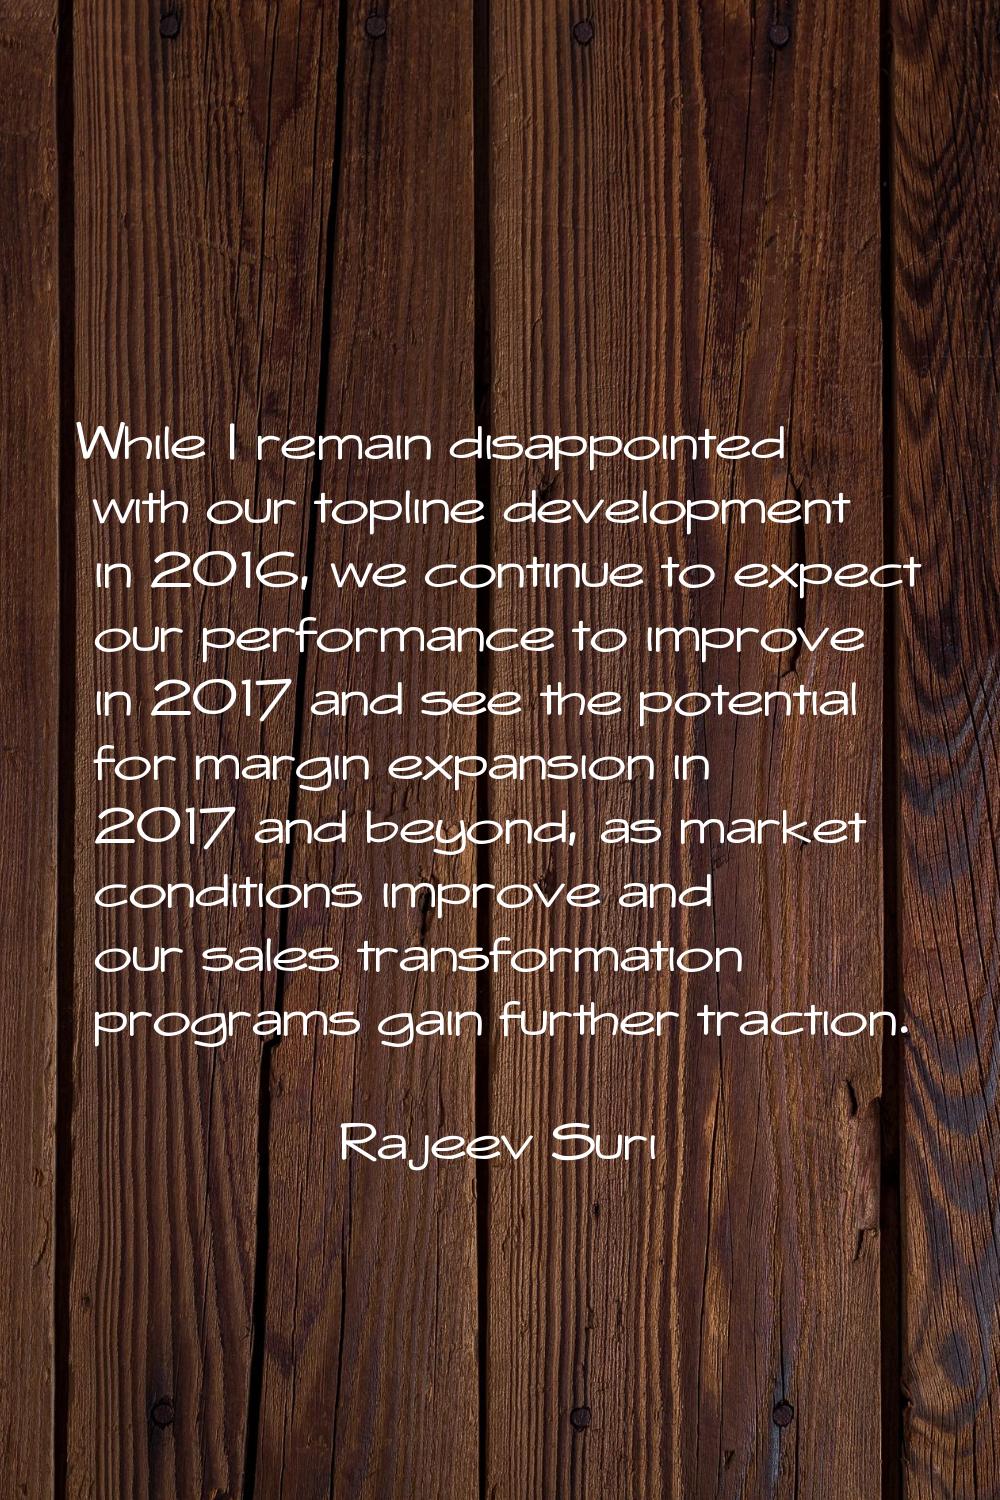 While I remain disappointed with our topline development in 2016, we continue to expect our perform